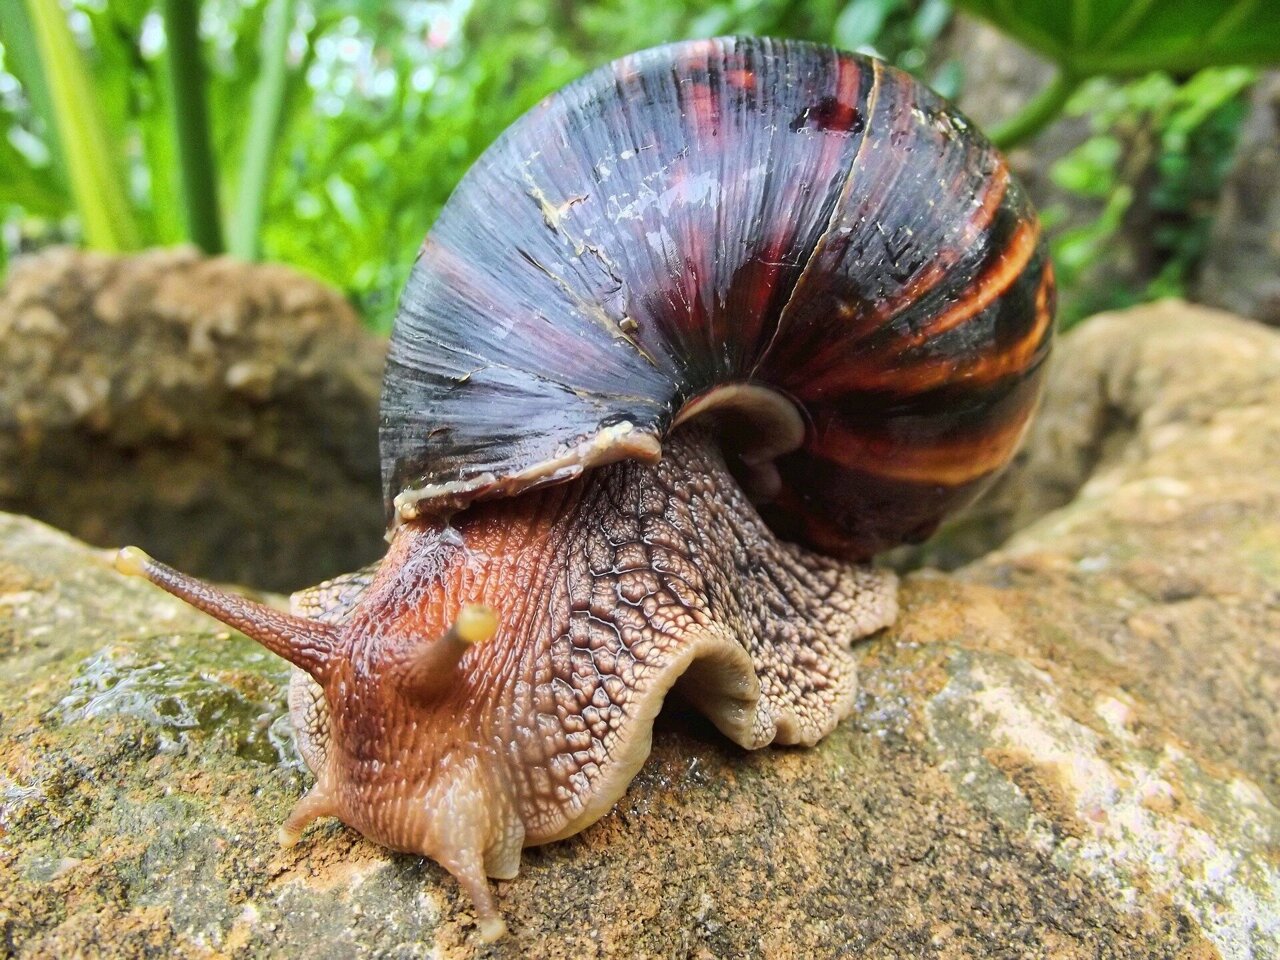 Look out, Pasco: Here come giant African land snails